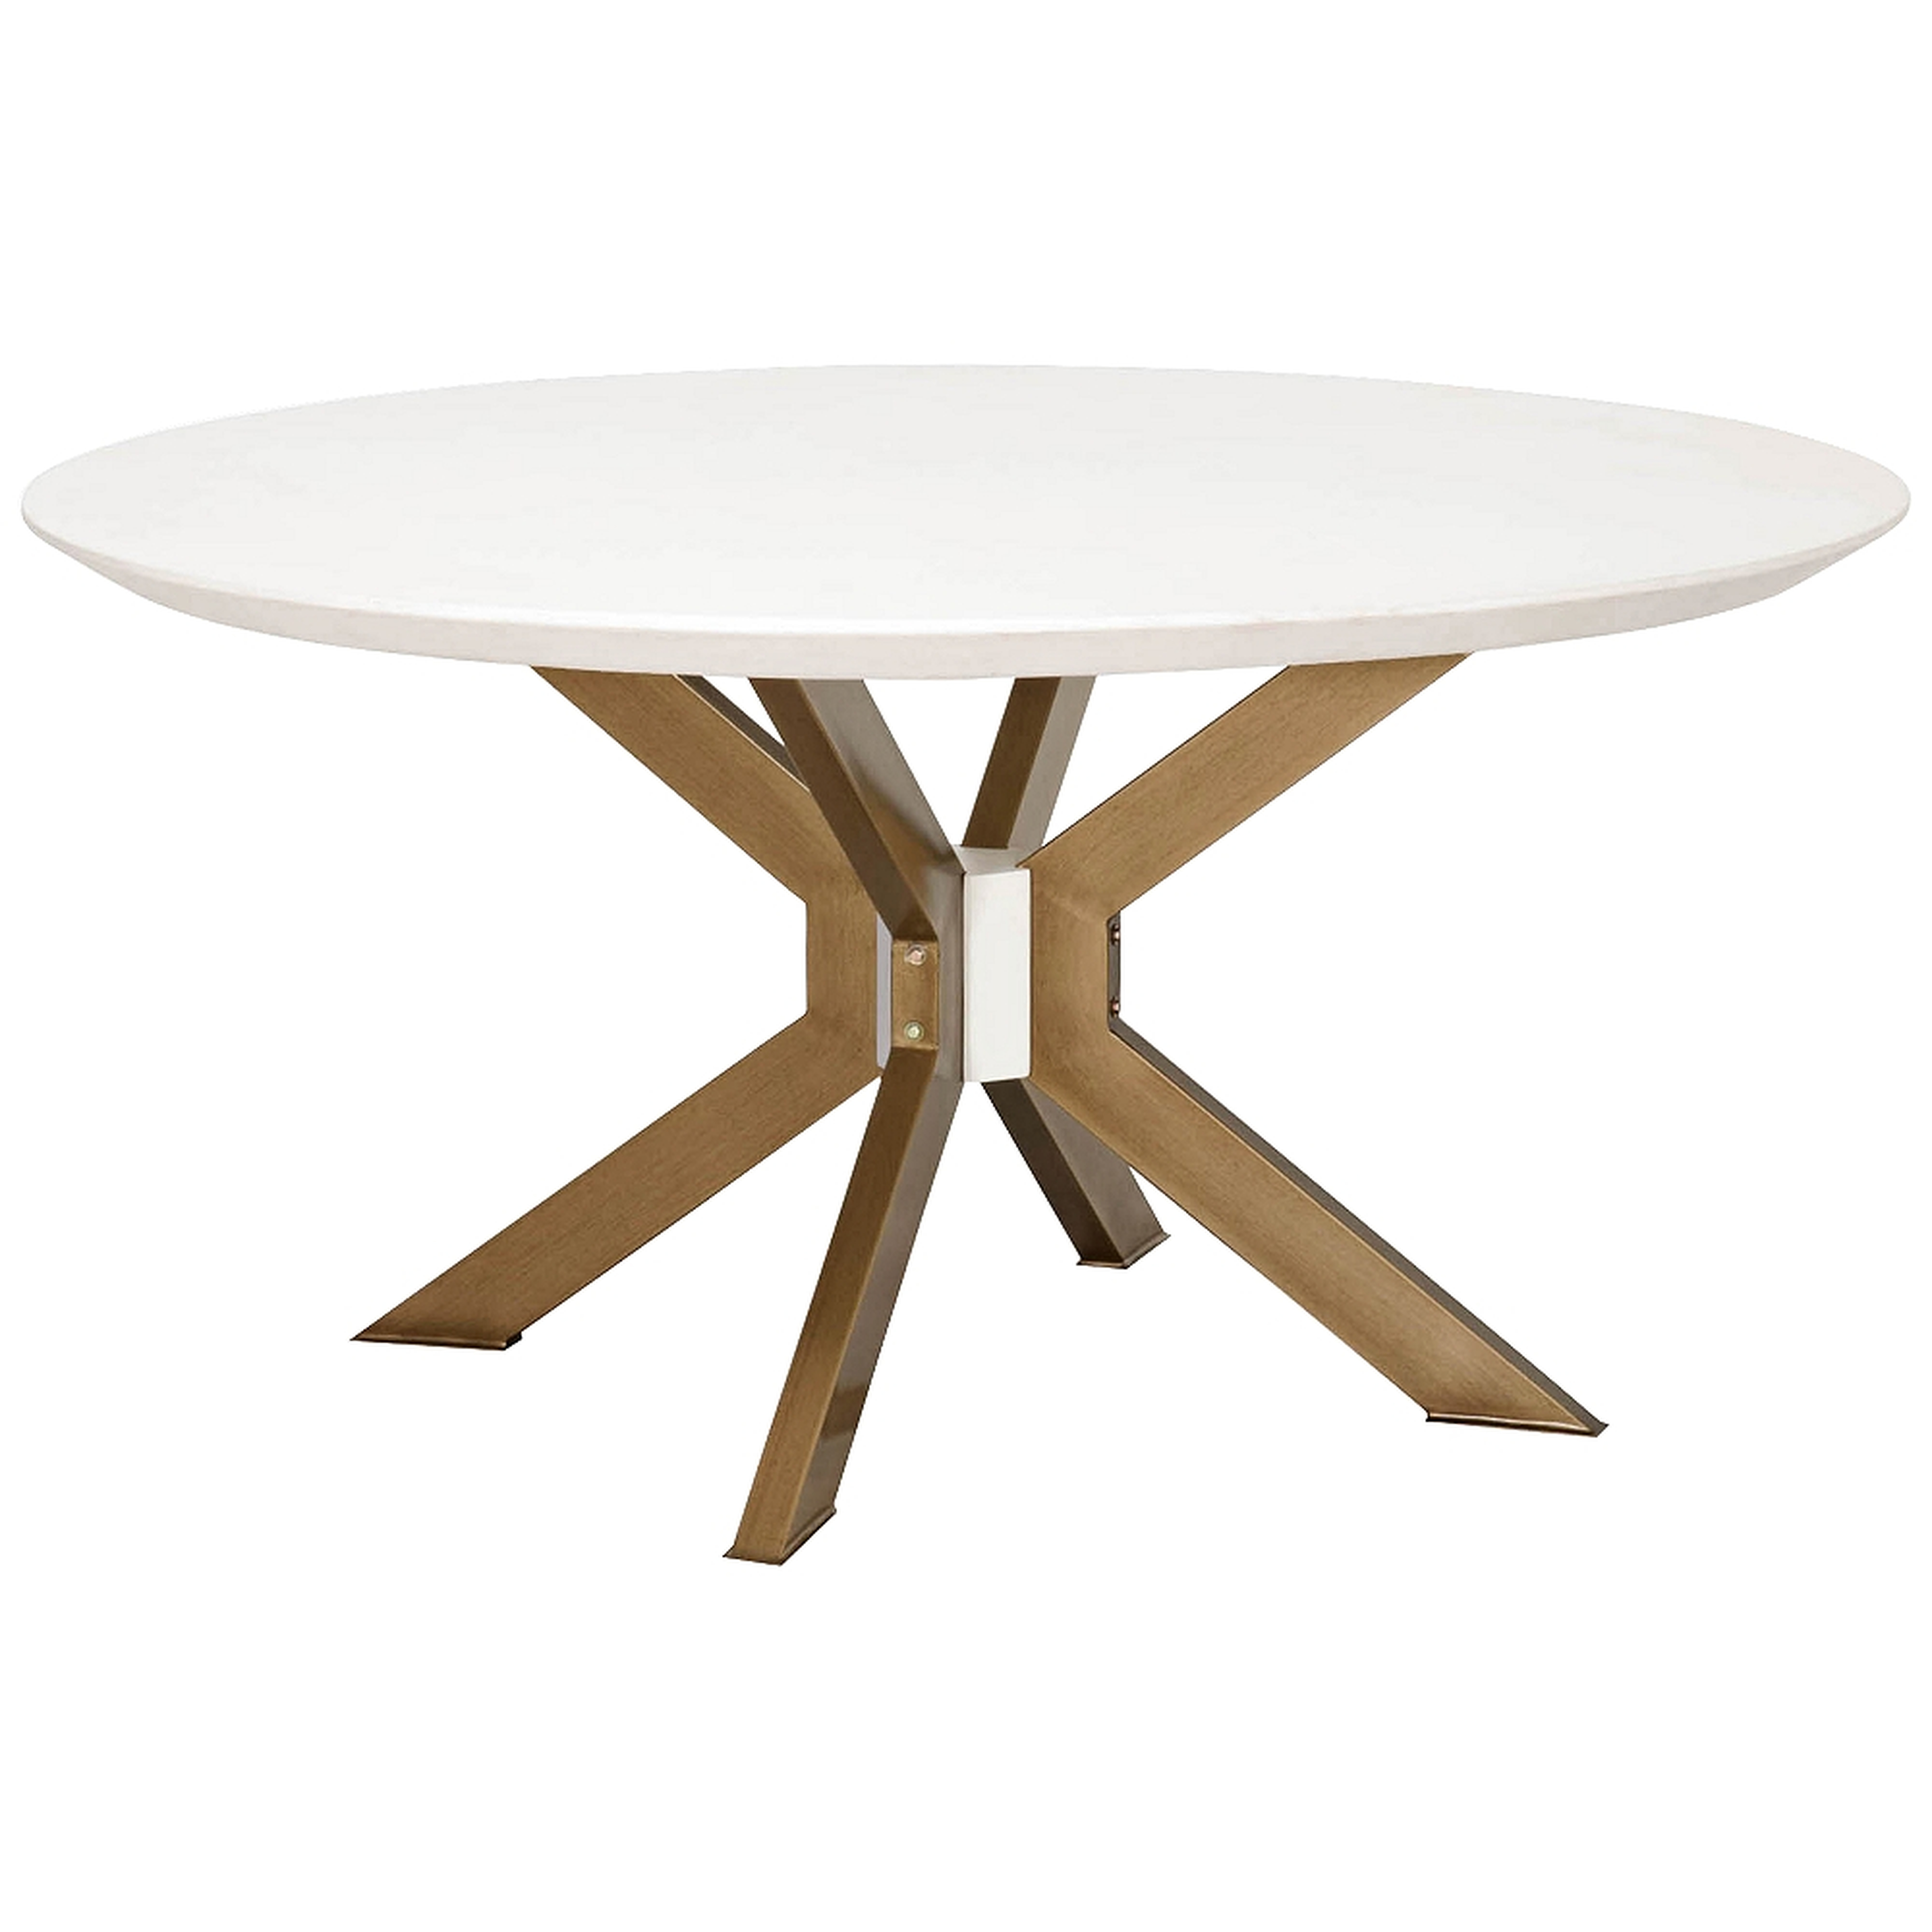 Industry 60" Wide Ivory and Brass Round Dining Table - Style # 86P76 - Lamps Plus